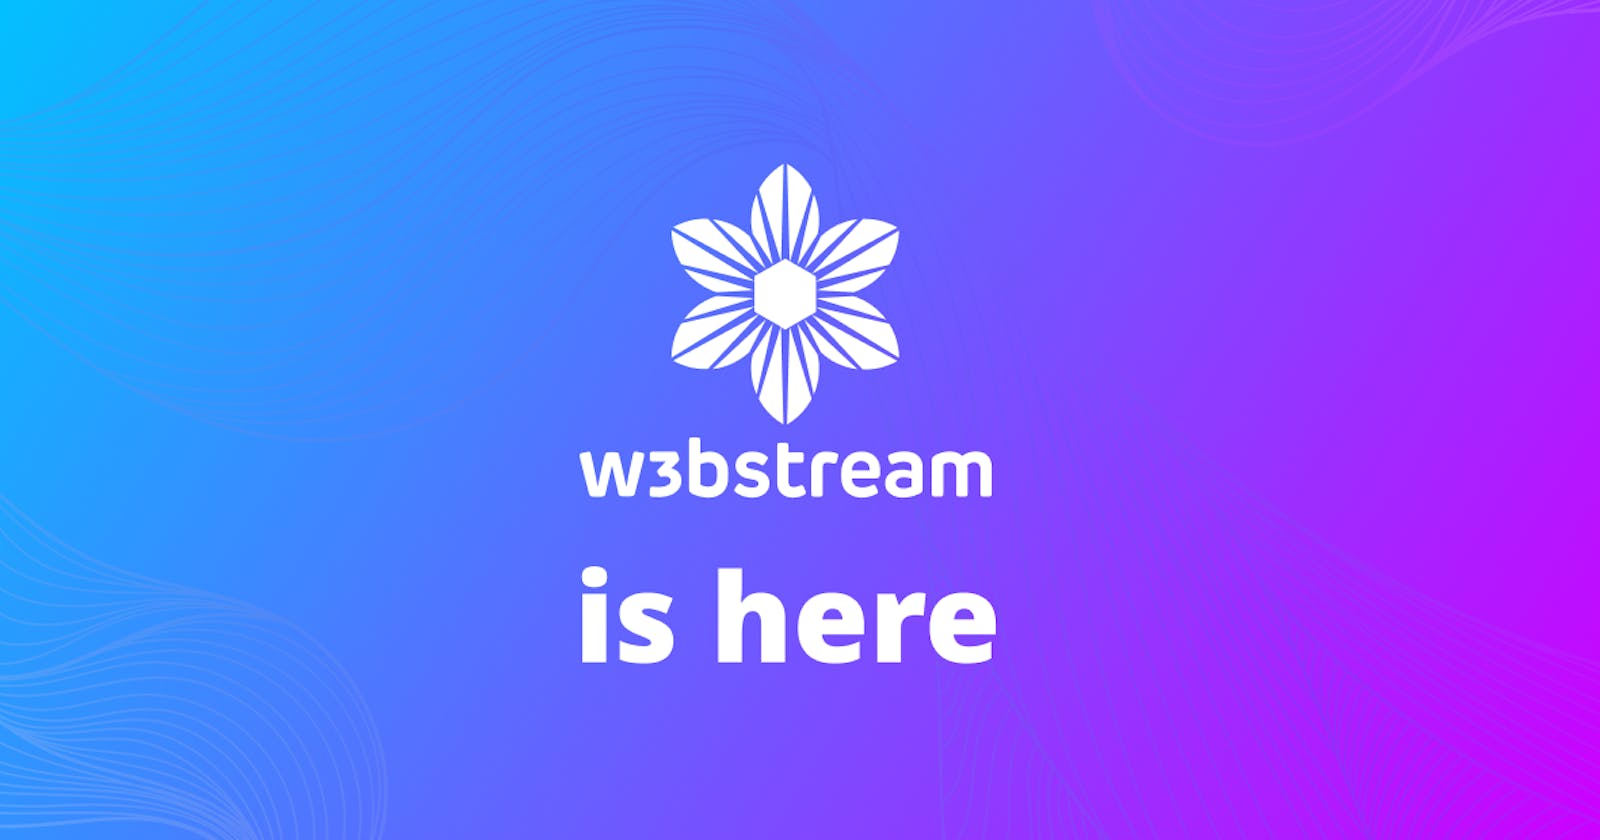 Chain-agnostic W3bstream enables developers to create amazing MachineFi dApps